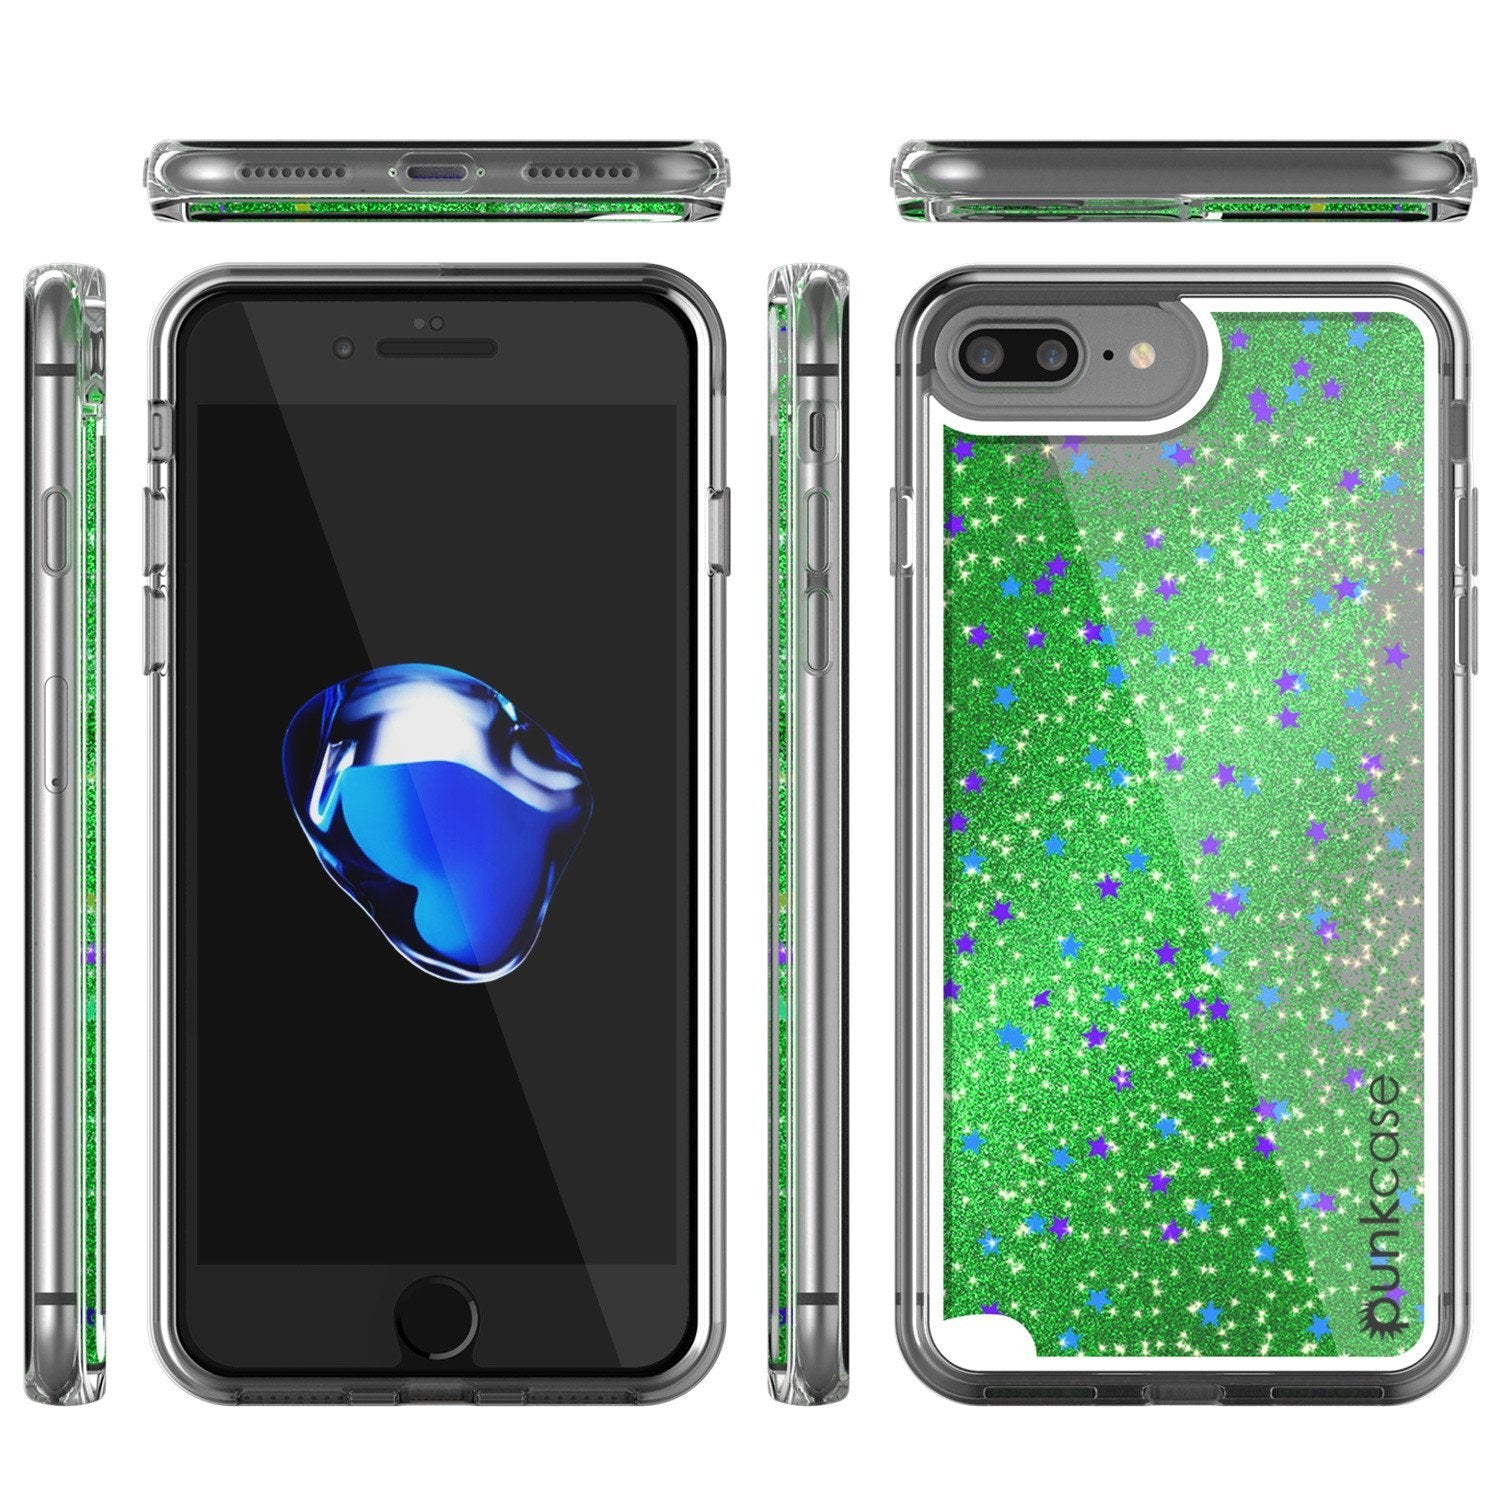 iPhone 8+ Plus Case, PunkCase LIQUID Green Series, Protective Dual Layer Floating Glitter Cover